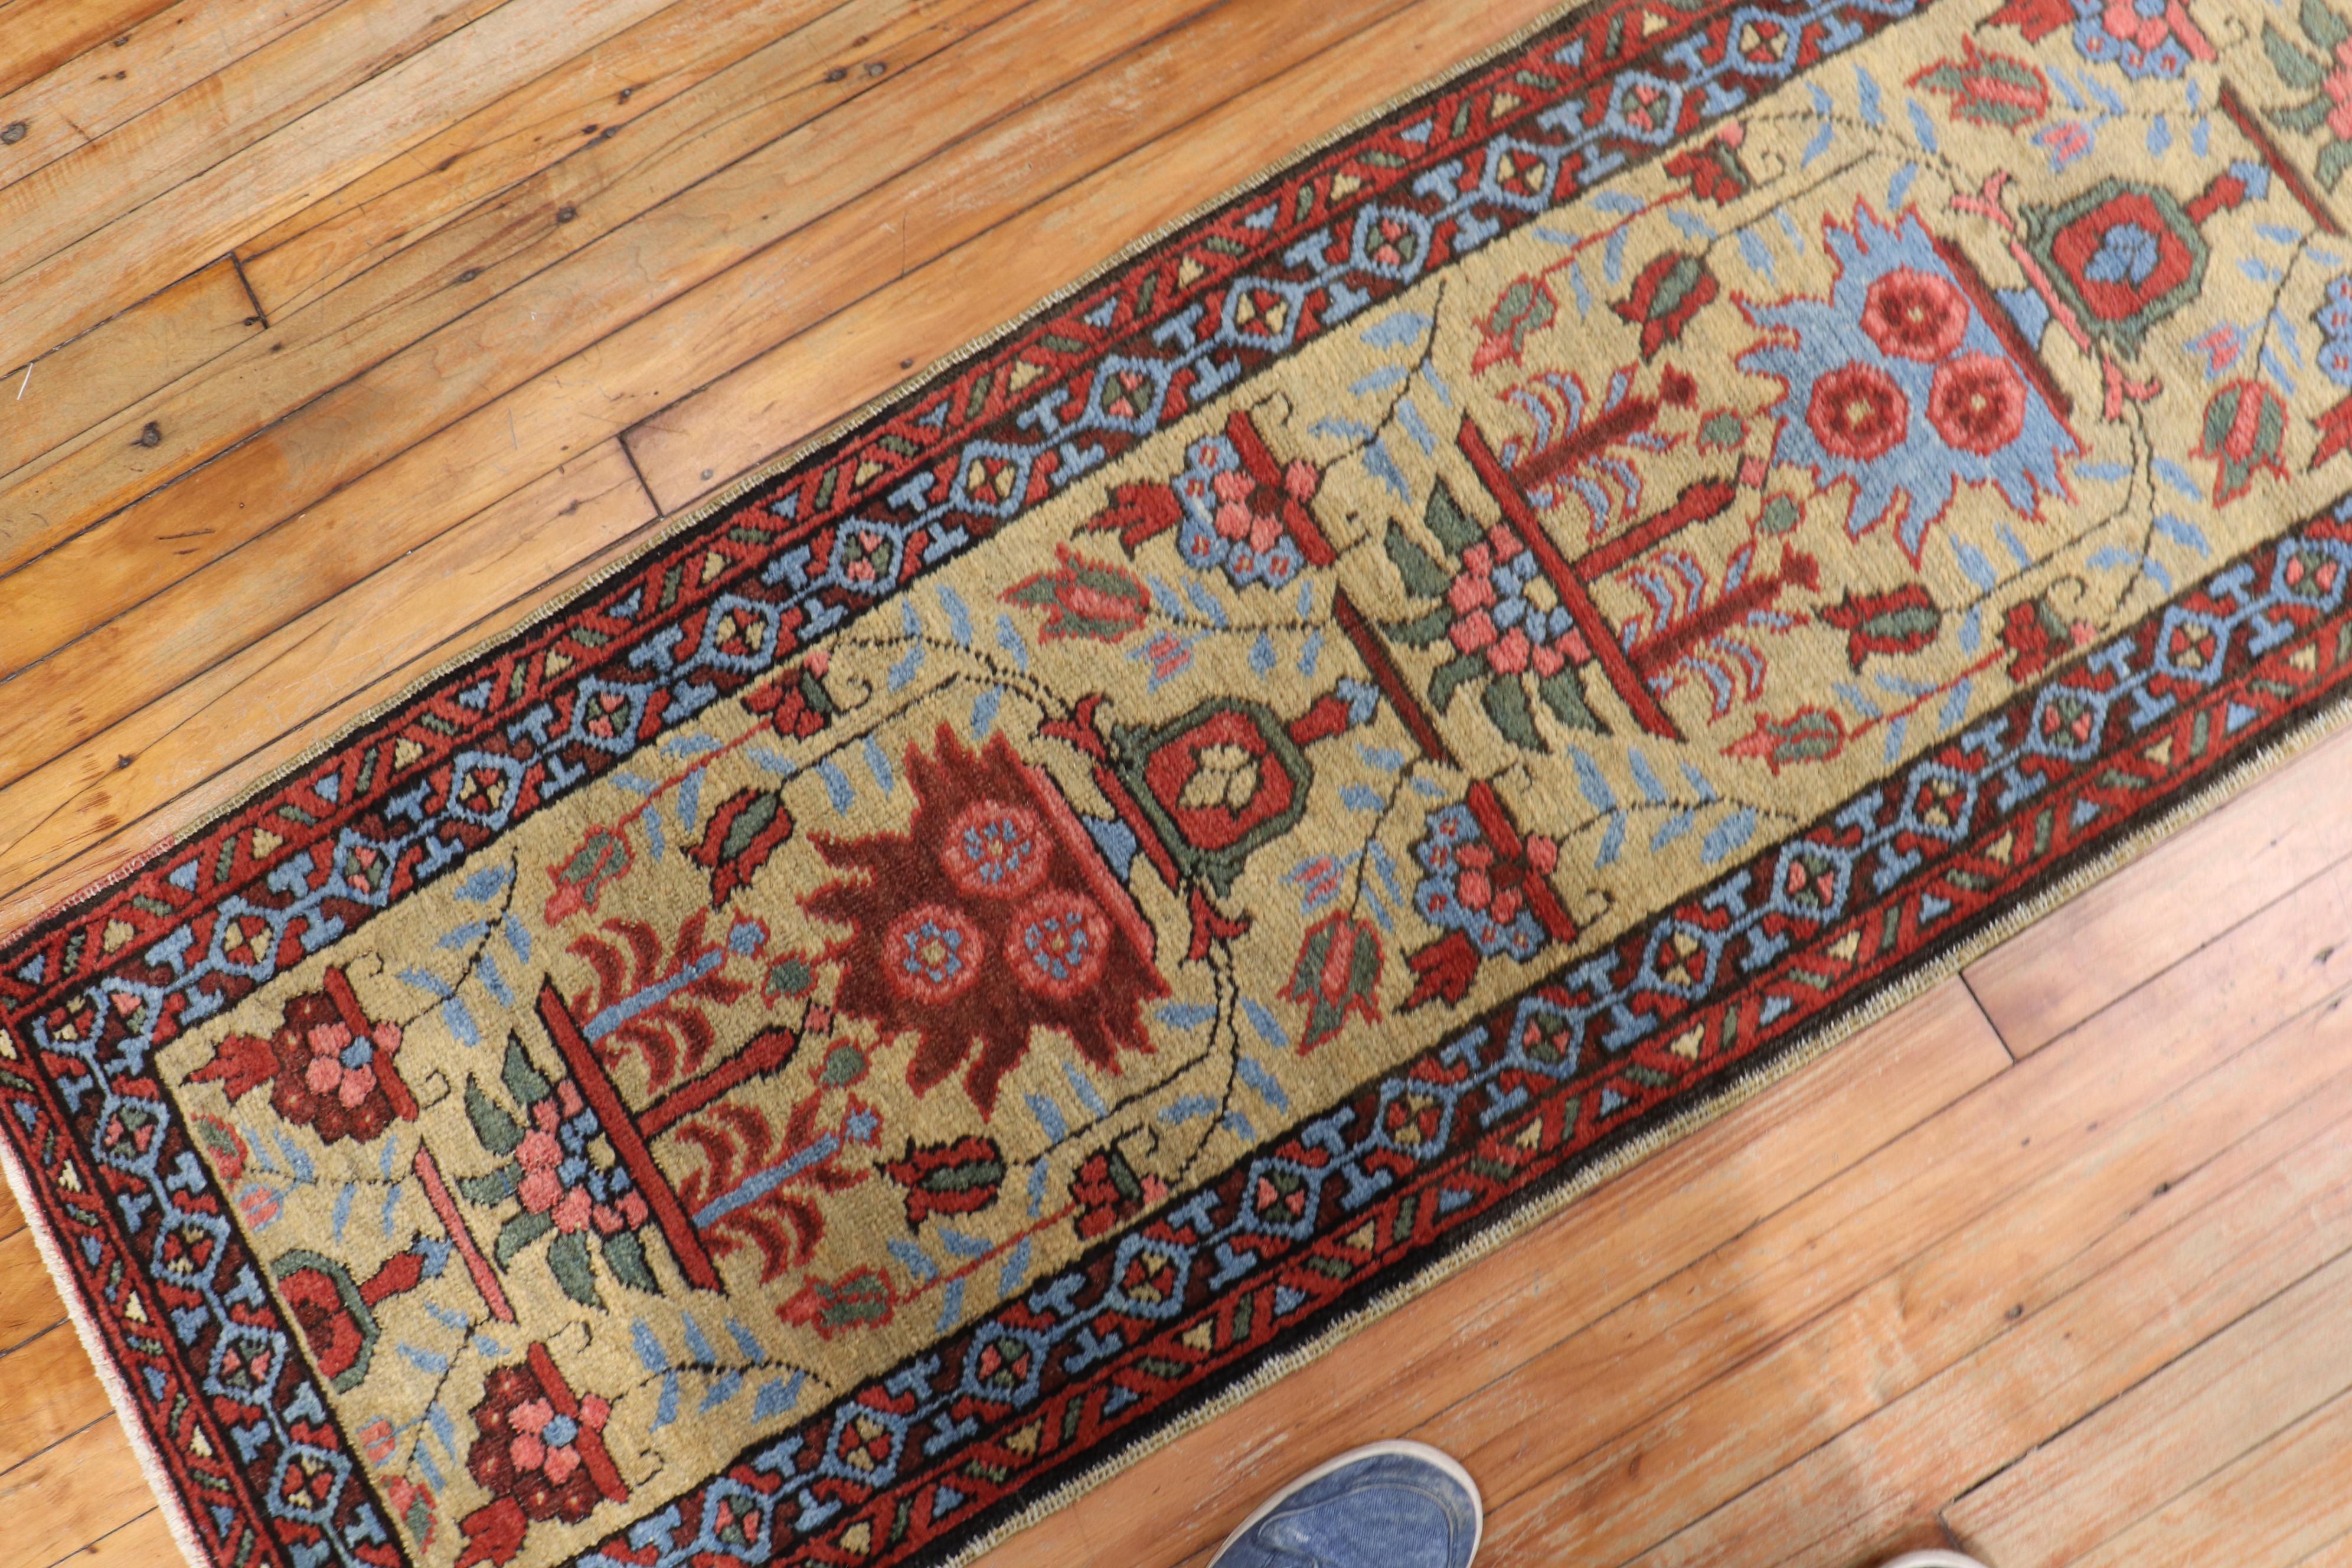 A narrow Persian Heriz runner from the 2nd quarter of the 20th century.

Measures: 1'11” x 9'.